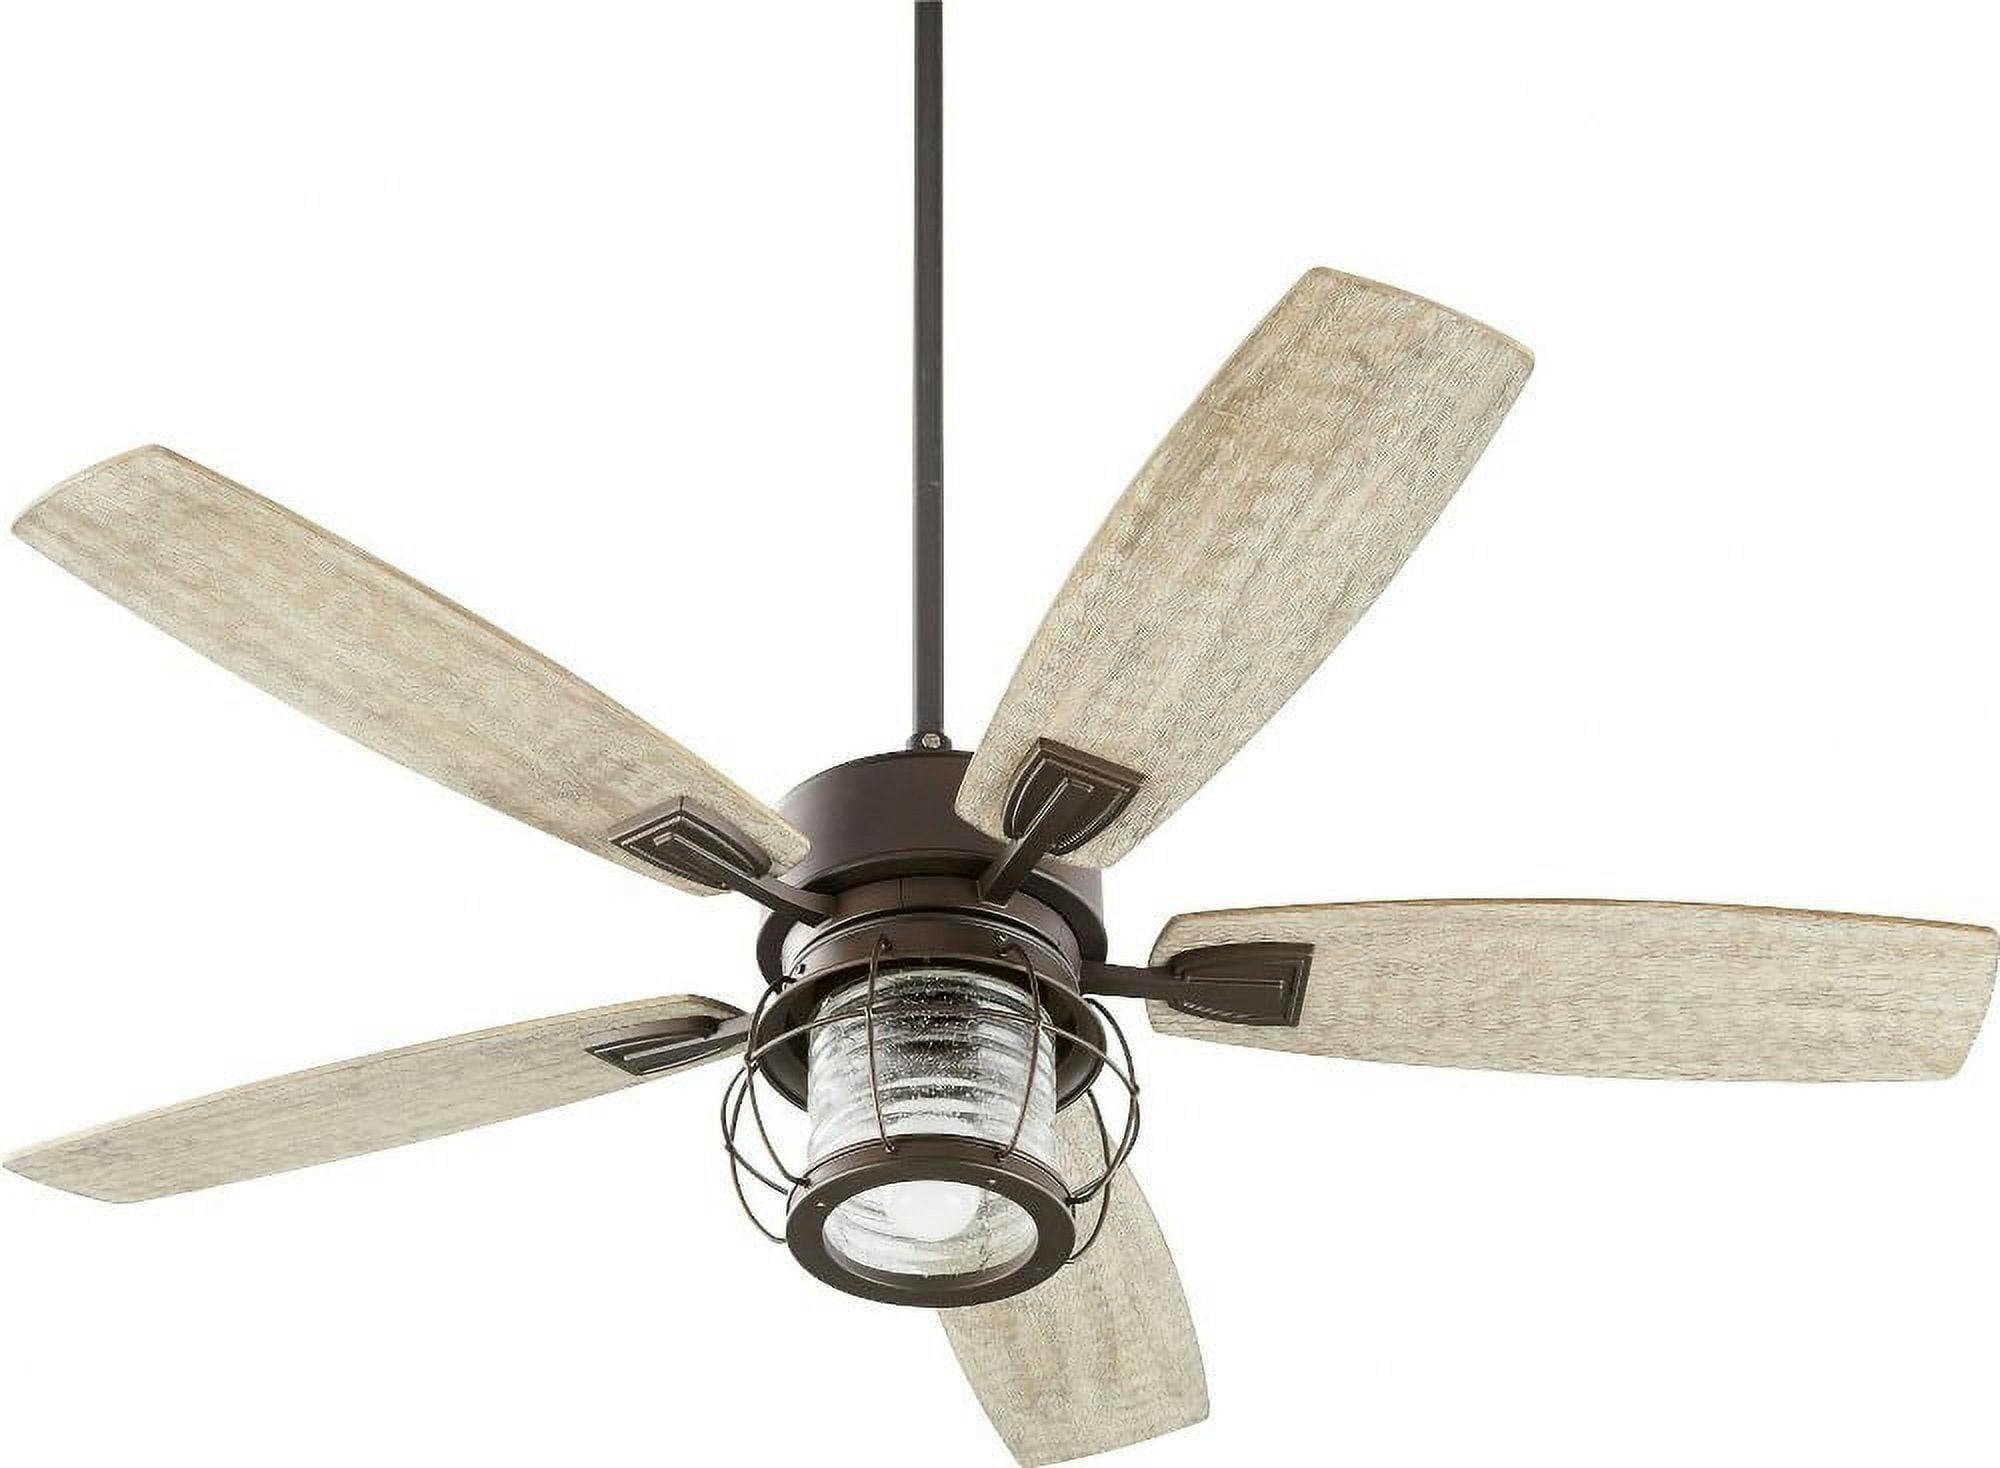 Galveston 52" Bronze Ceiling Fan with Weathered Oak Blades and LED Light